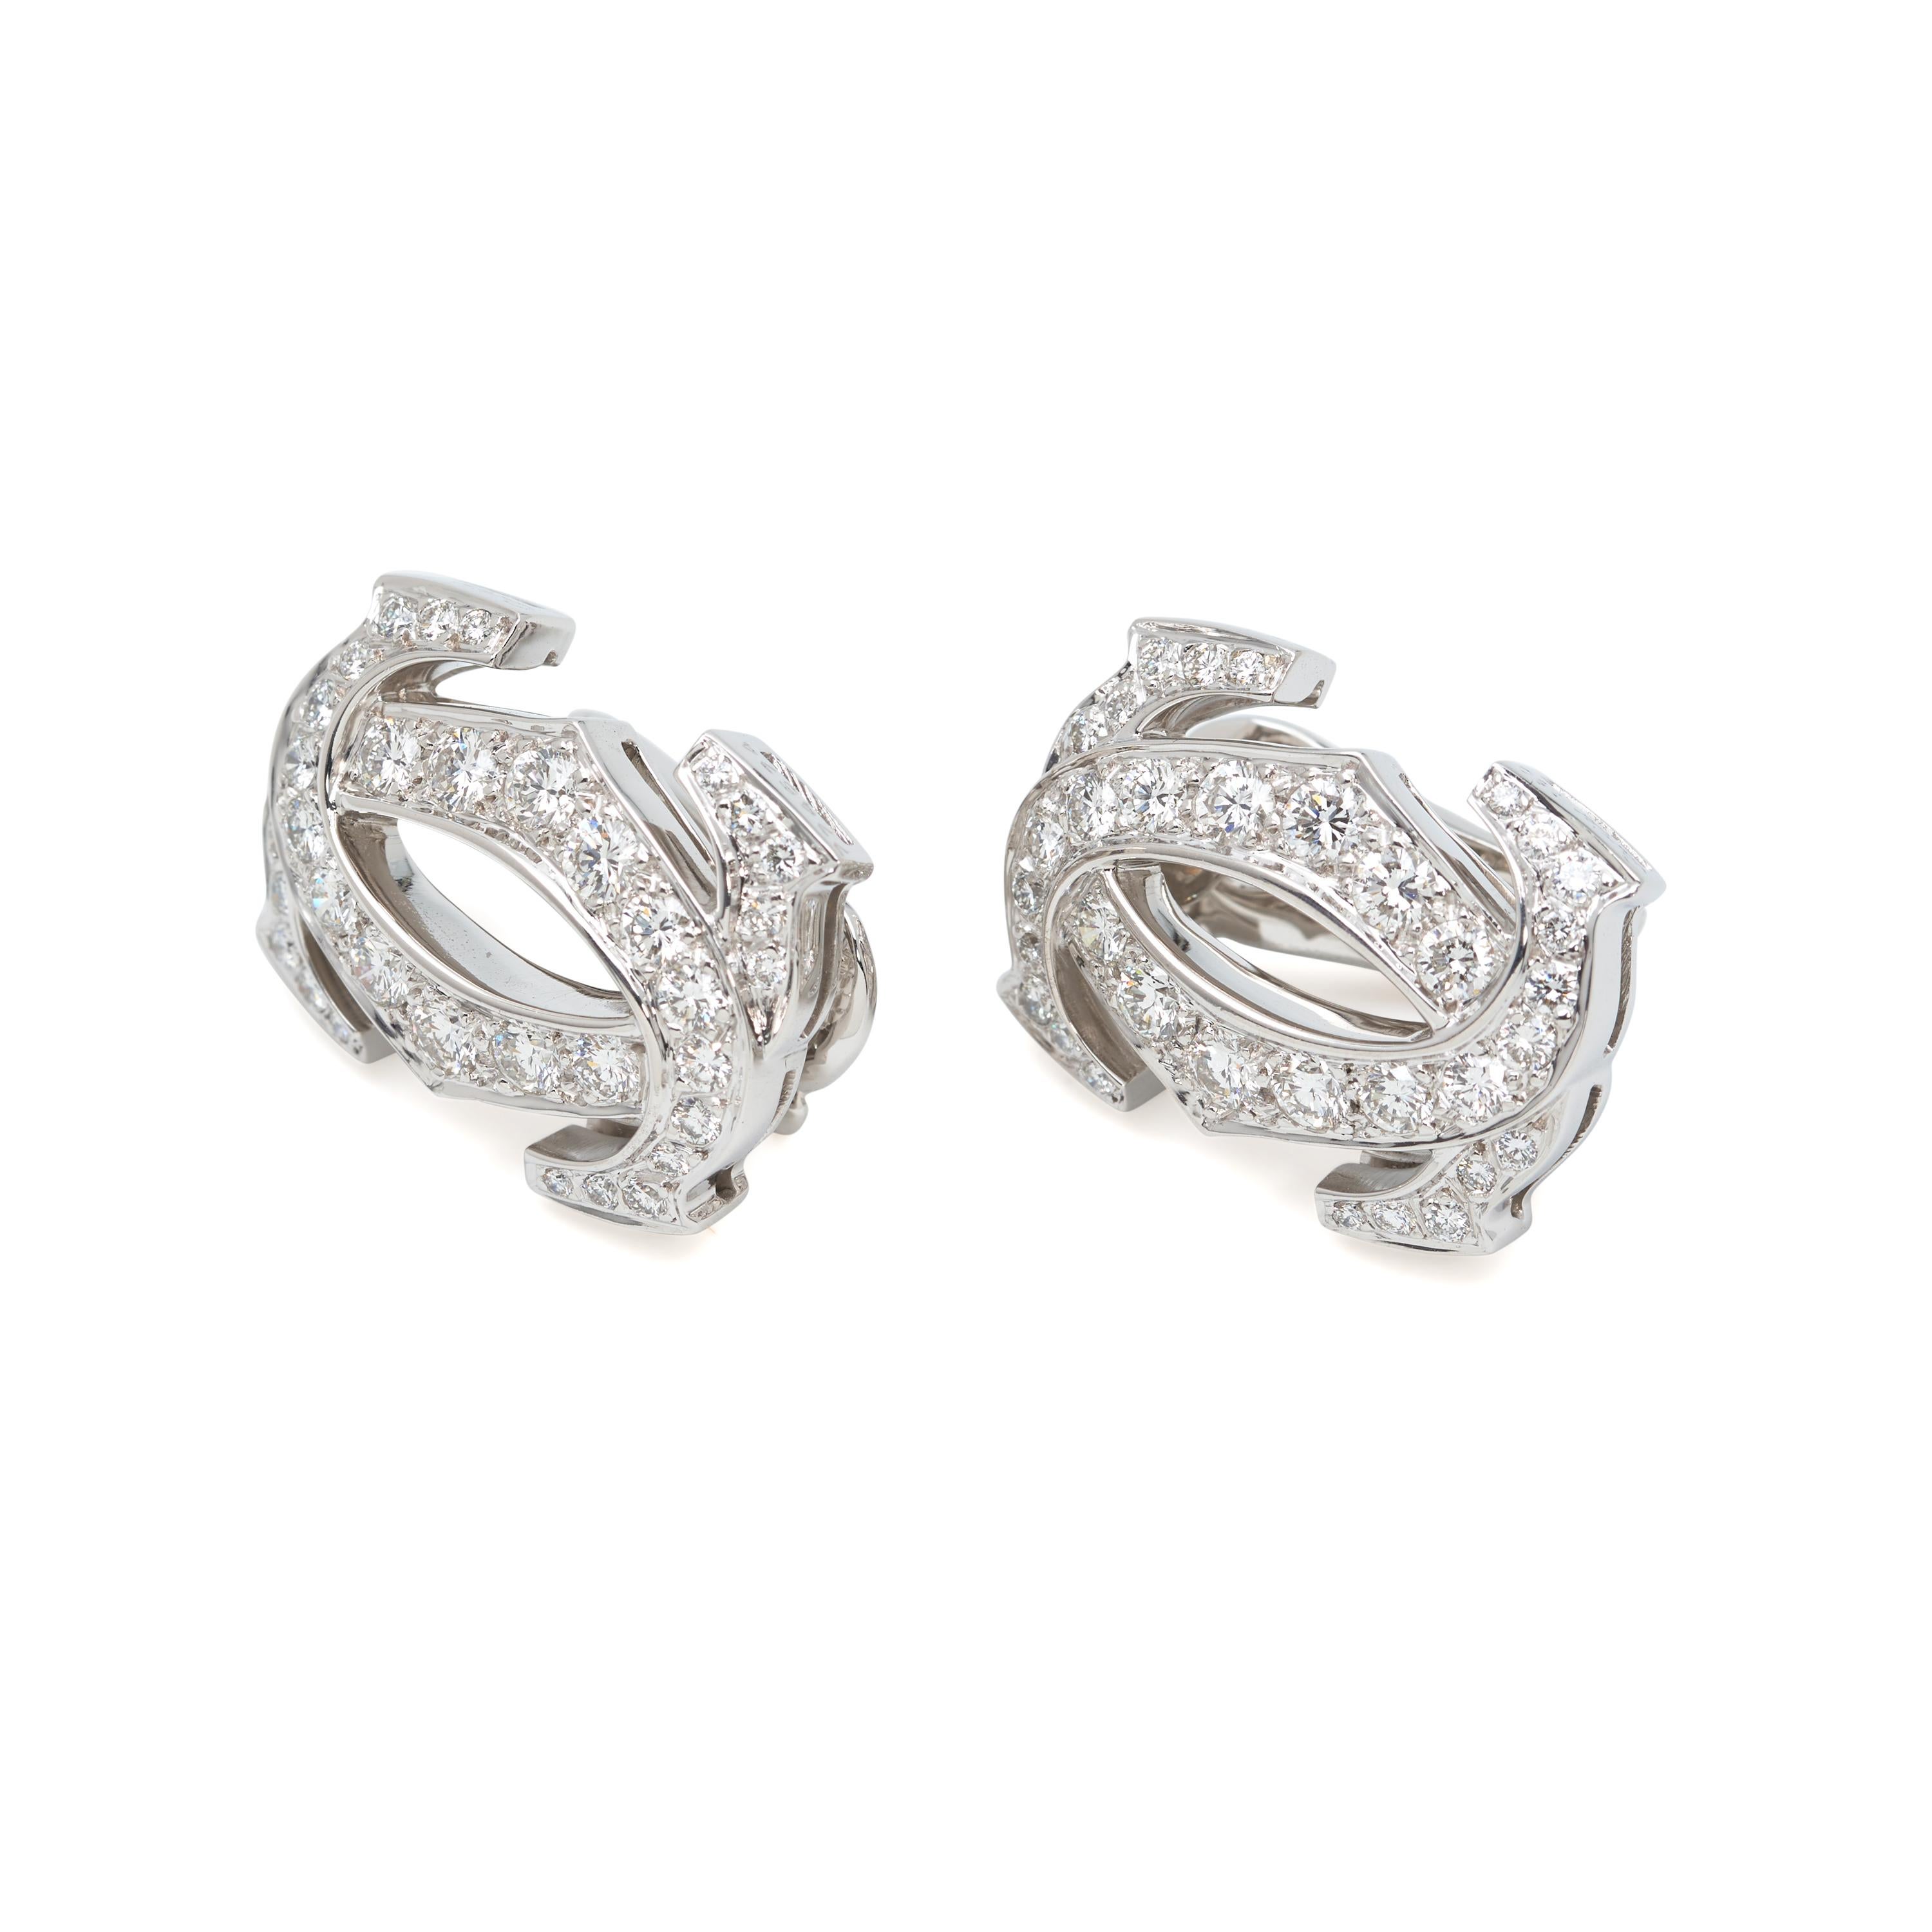 Authentic Cartier Penelope earclips crafted in 18k white gold and set with an estimated 2 carats of high-quality round brilliant cut diamonds. The earrings measure 21mm in length and 16mm in width with clip backs for non-pierced ears.  Signed